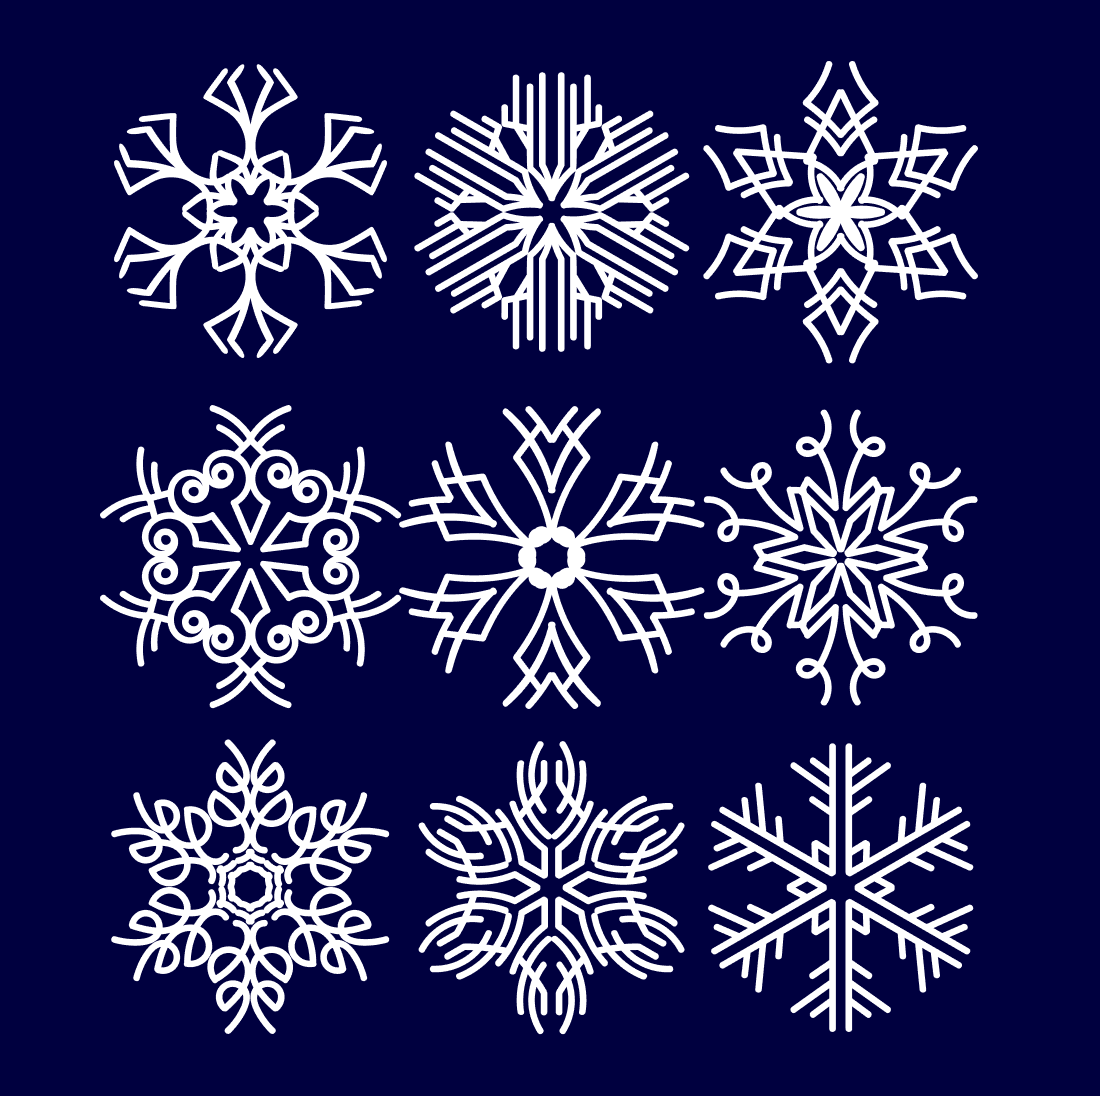 Diverse of snowflakes on the blue background.